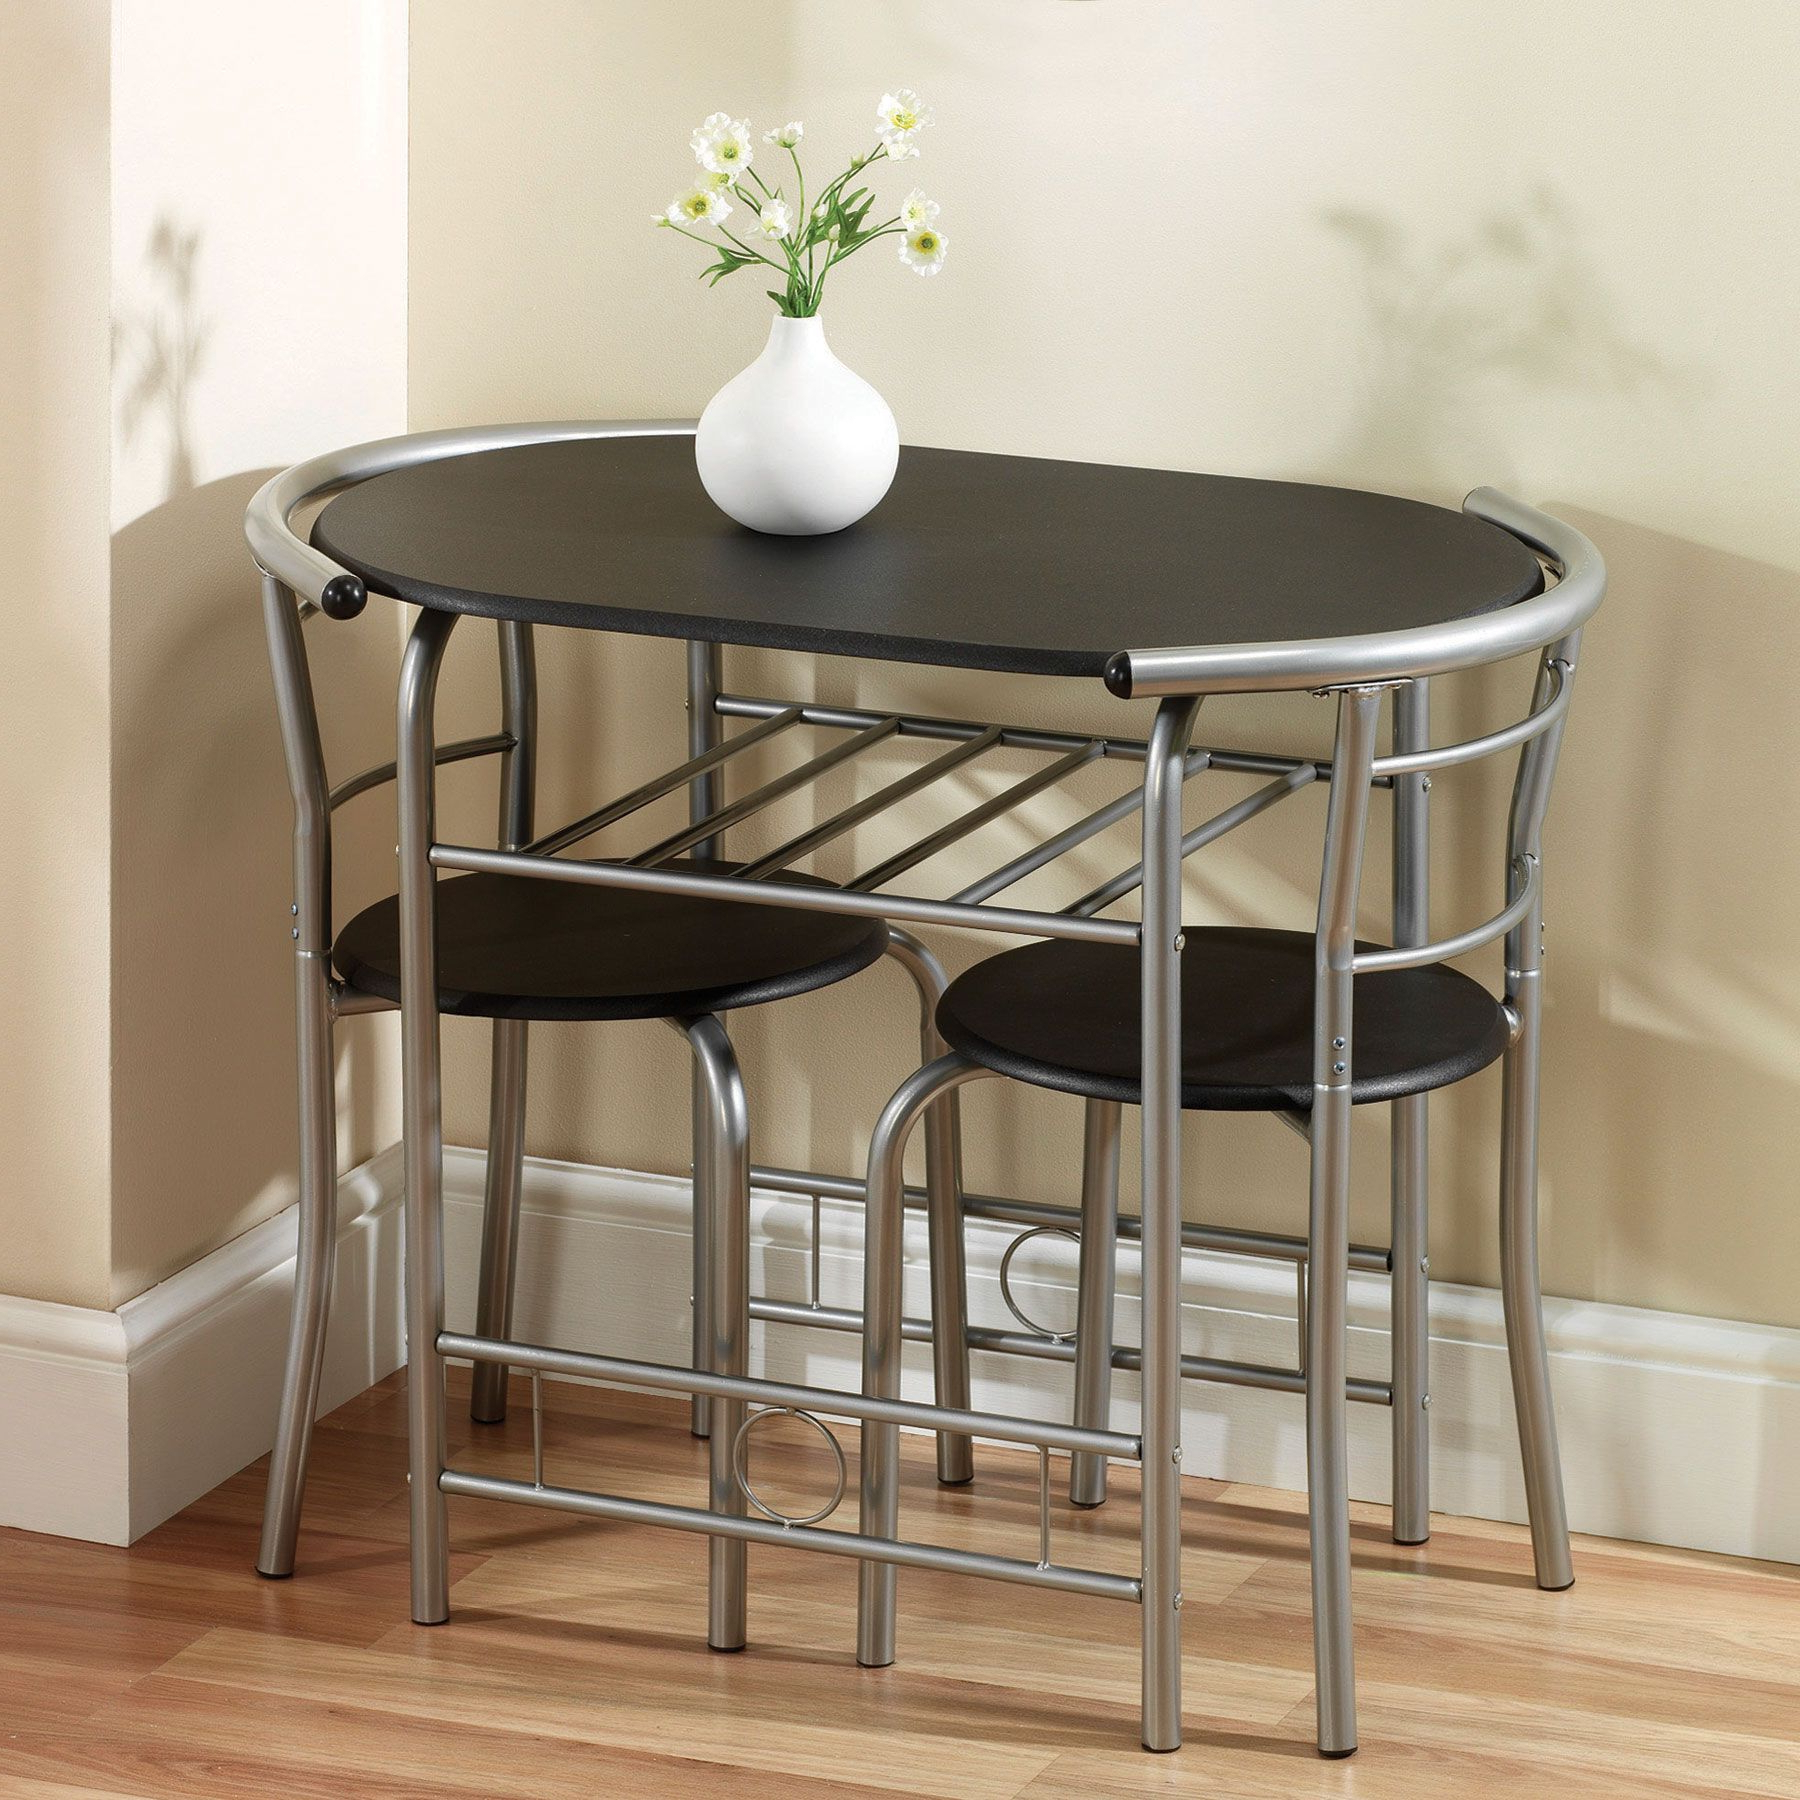 Space Saving Dining Table Compact, Small Dining Room Sets For 4